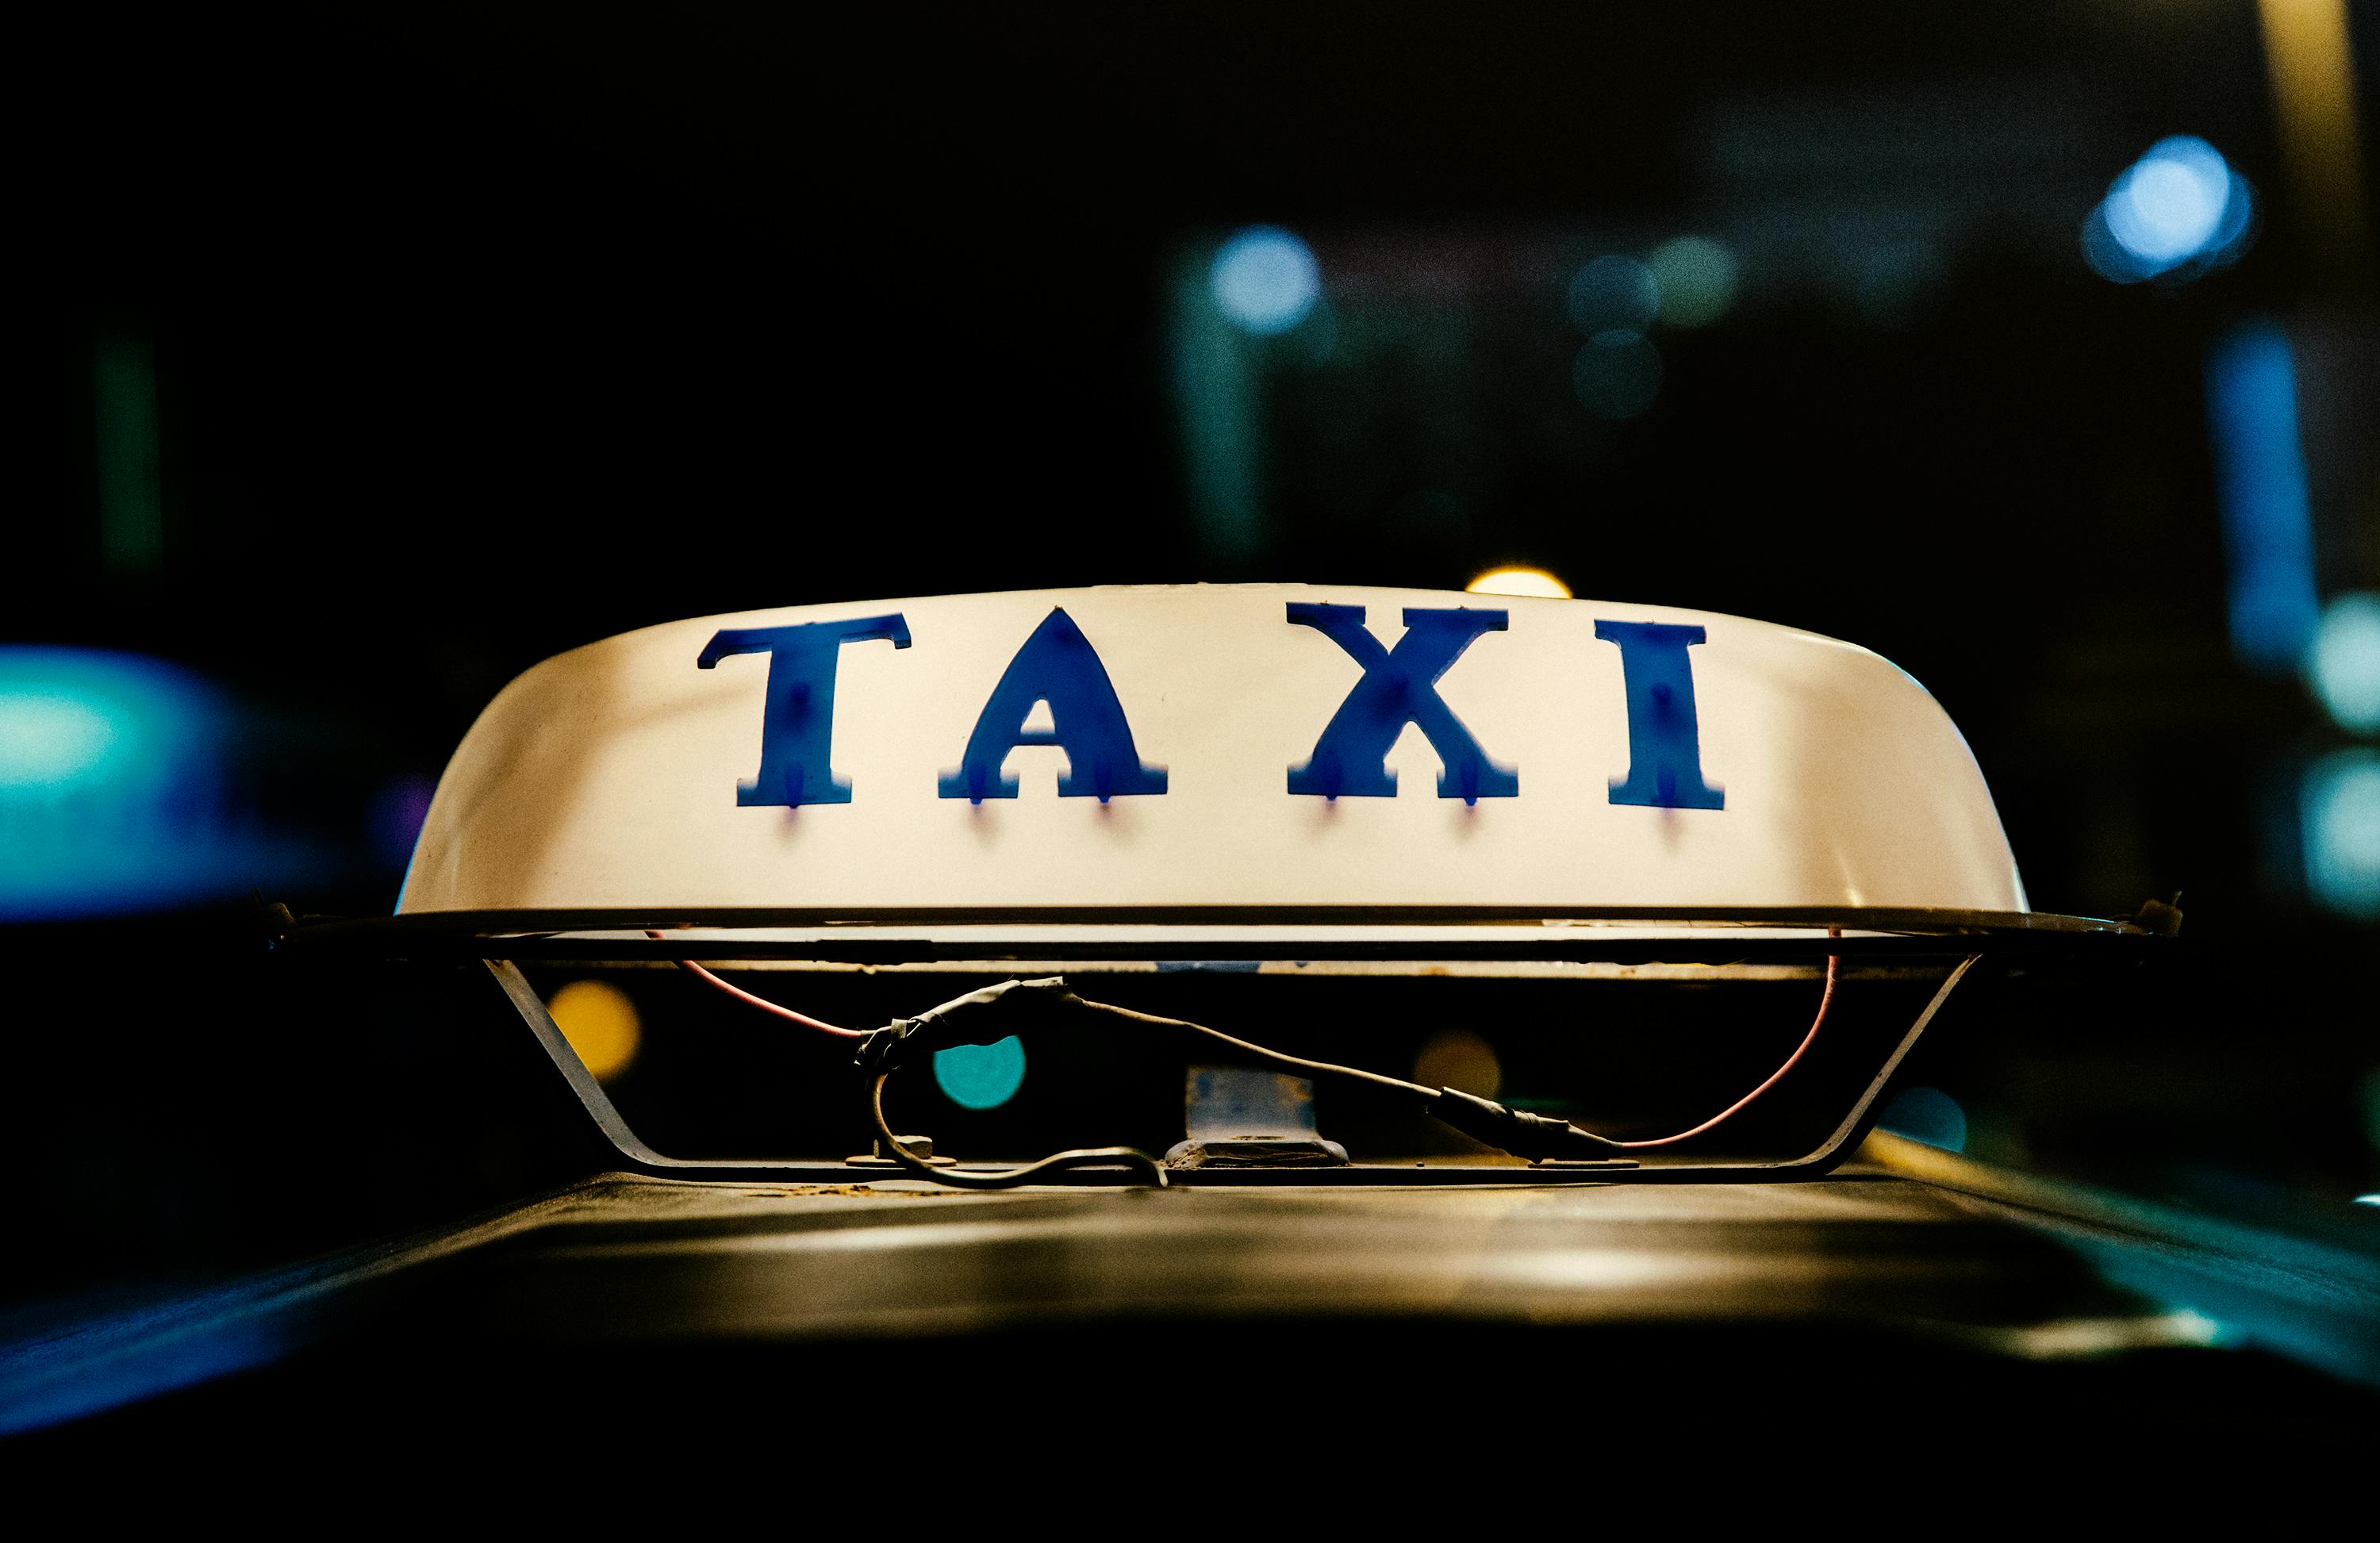 A taxi light on top of the car | Source: Pexels